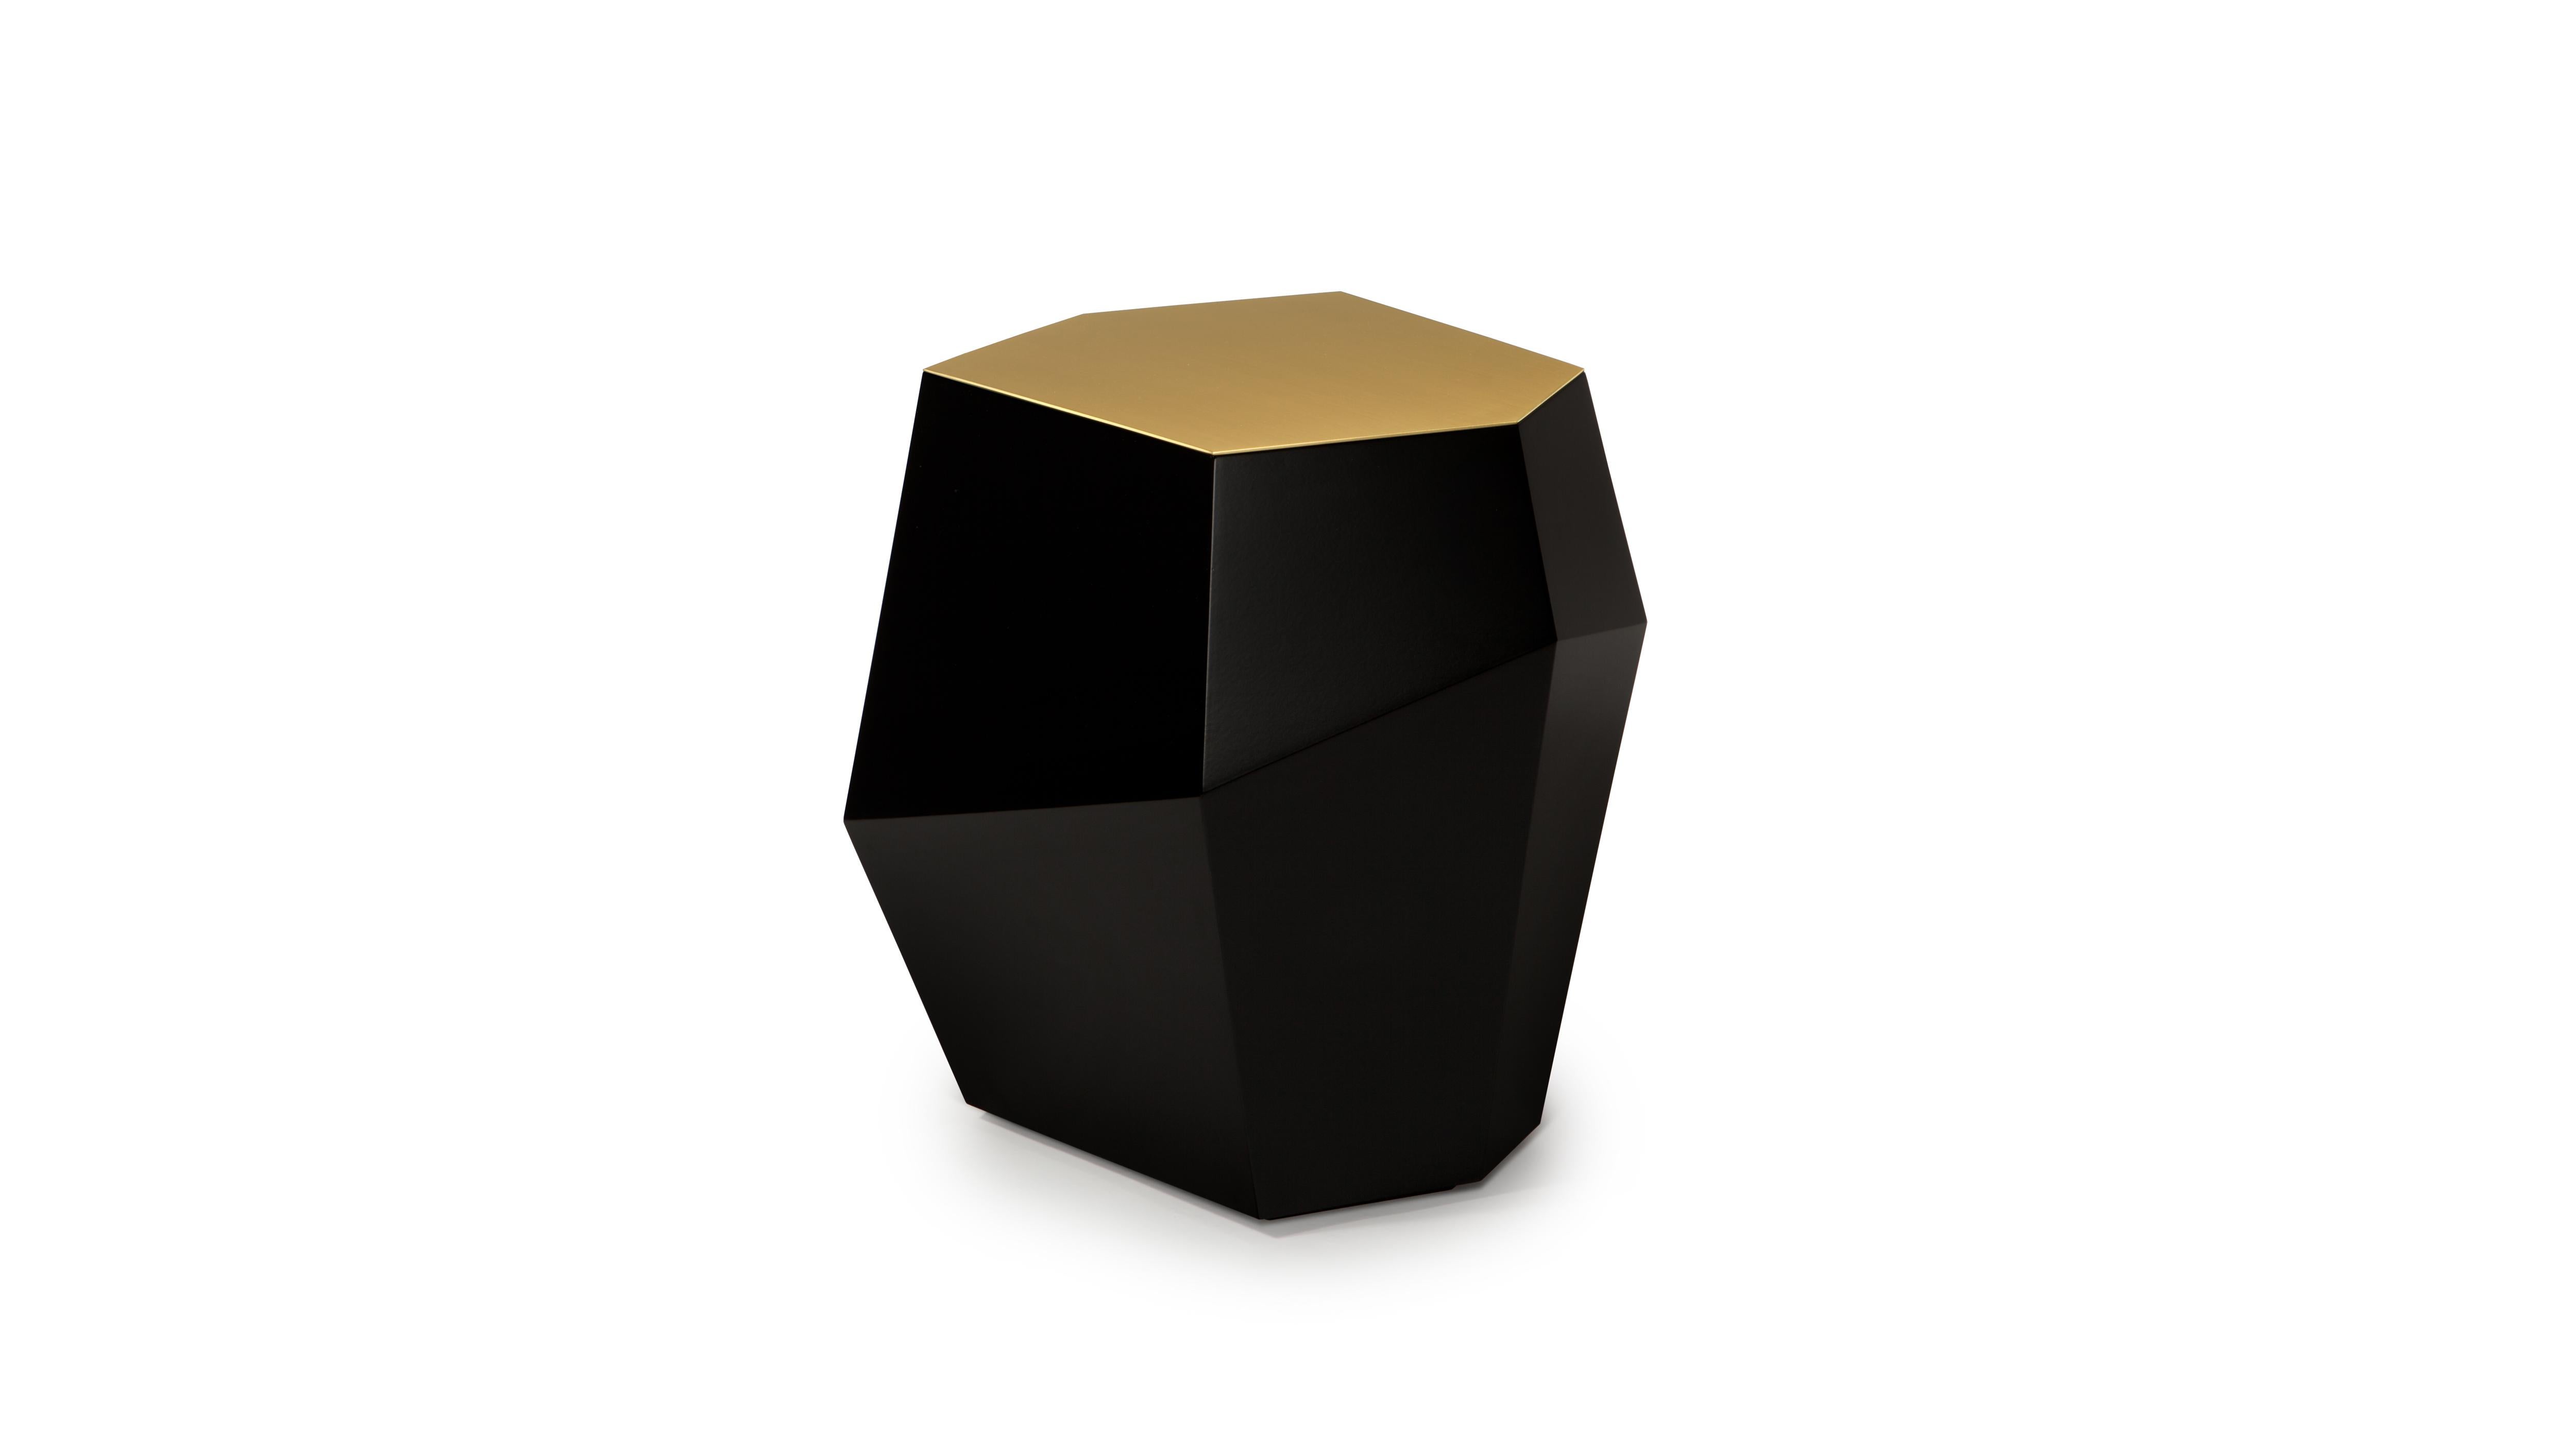 High Three Rocks Black and Brass Side Table by InsidherLand
Dimensions: D 40 x W 51 x H 48 cm.
Materials: Black lacquered, brushed brass.
8 kg.
Other materials available.

From The Special Tree, Fallen Leaves on the water reflected the faces of two